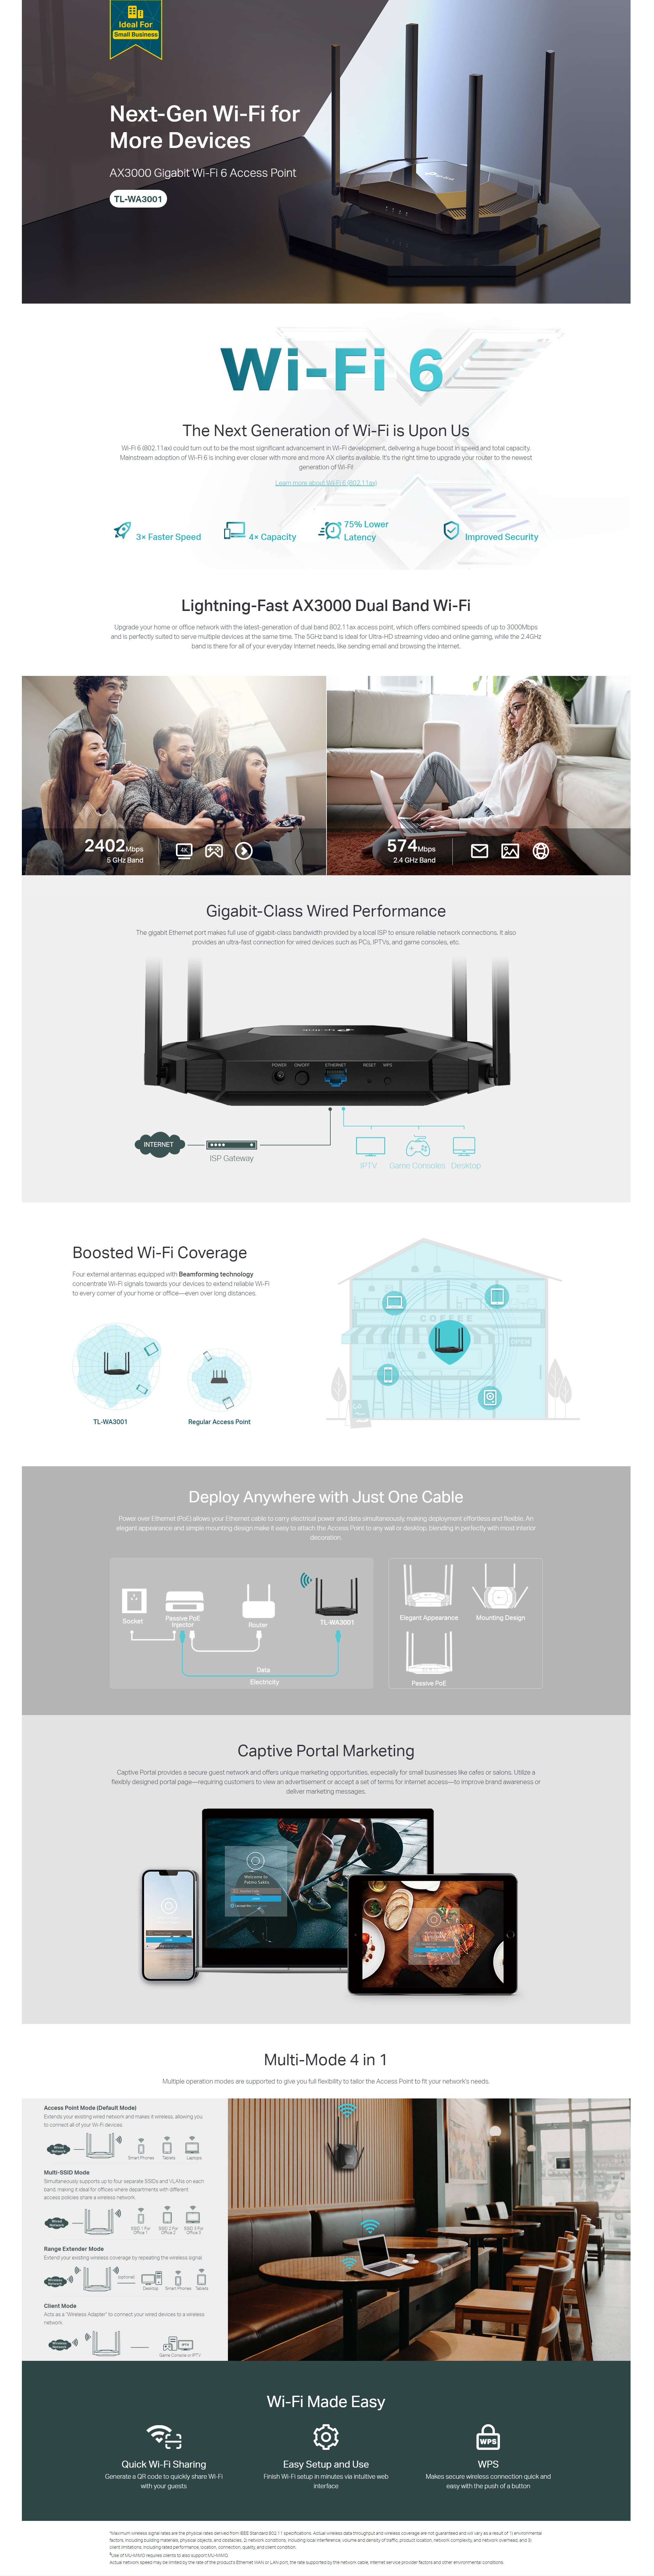 A large marketing image providing additional information about the product TP-Link TL-WA3001 - AX3000 Wi-Fi 6 Access Point - Additional alt info not provided